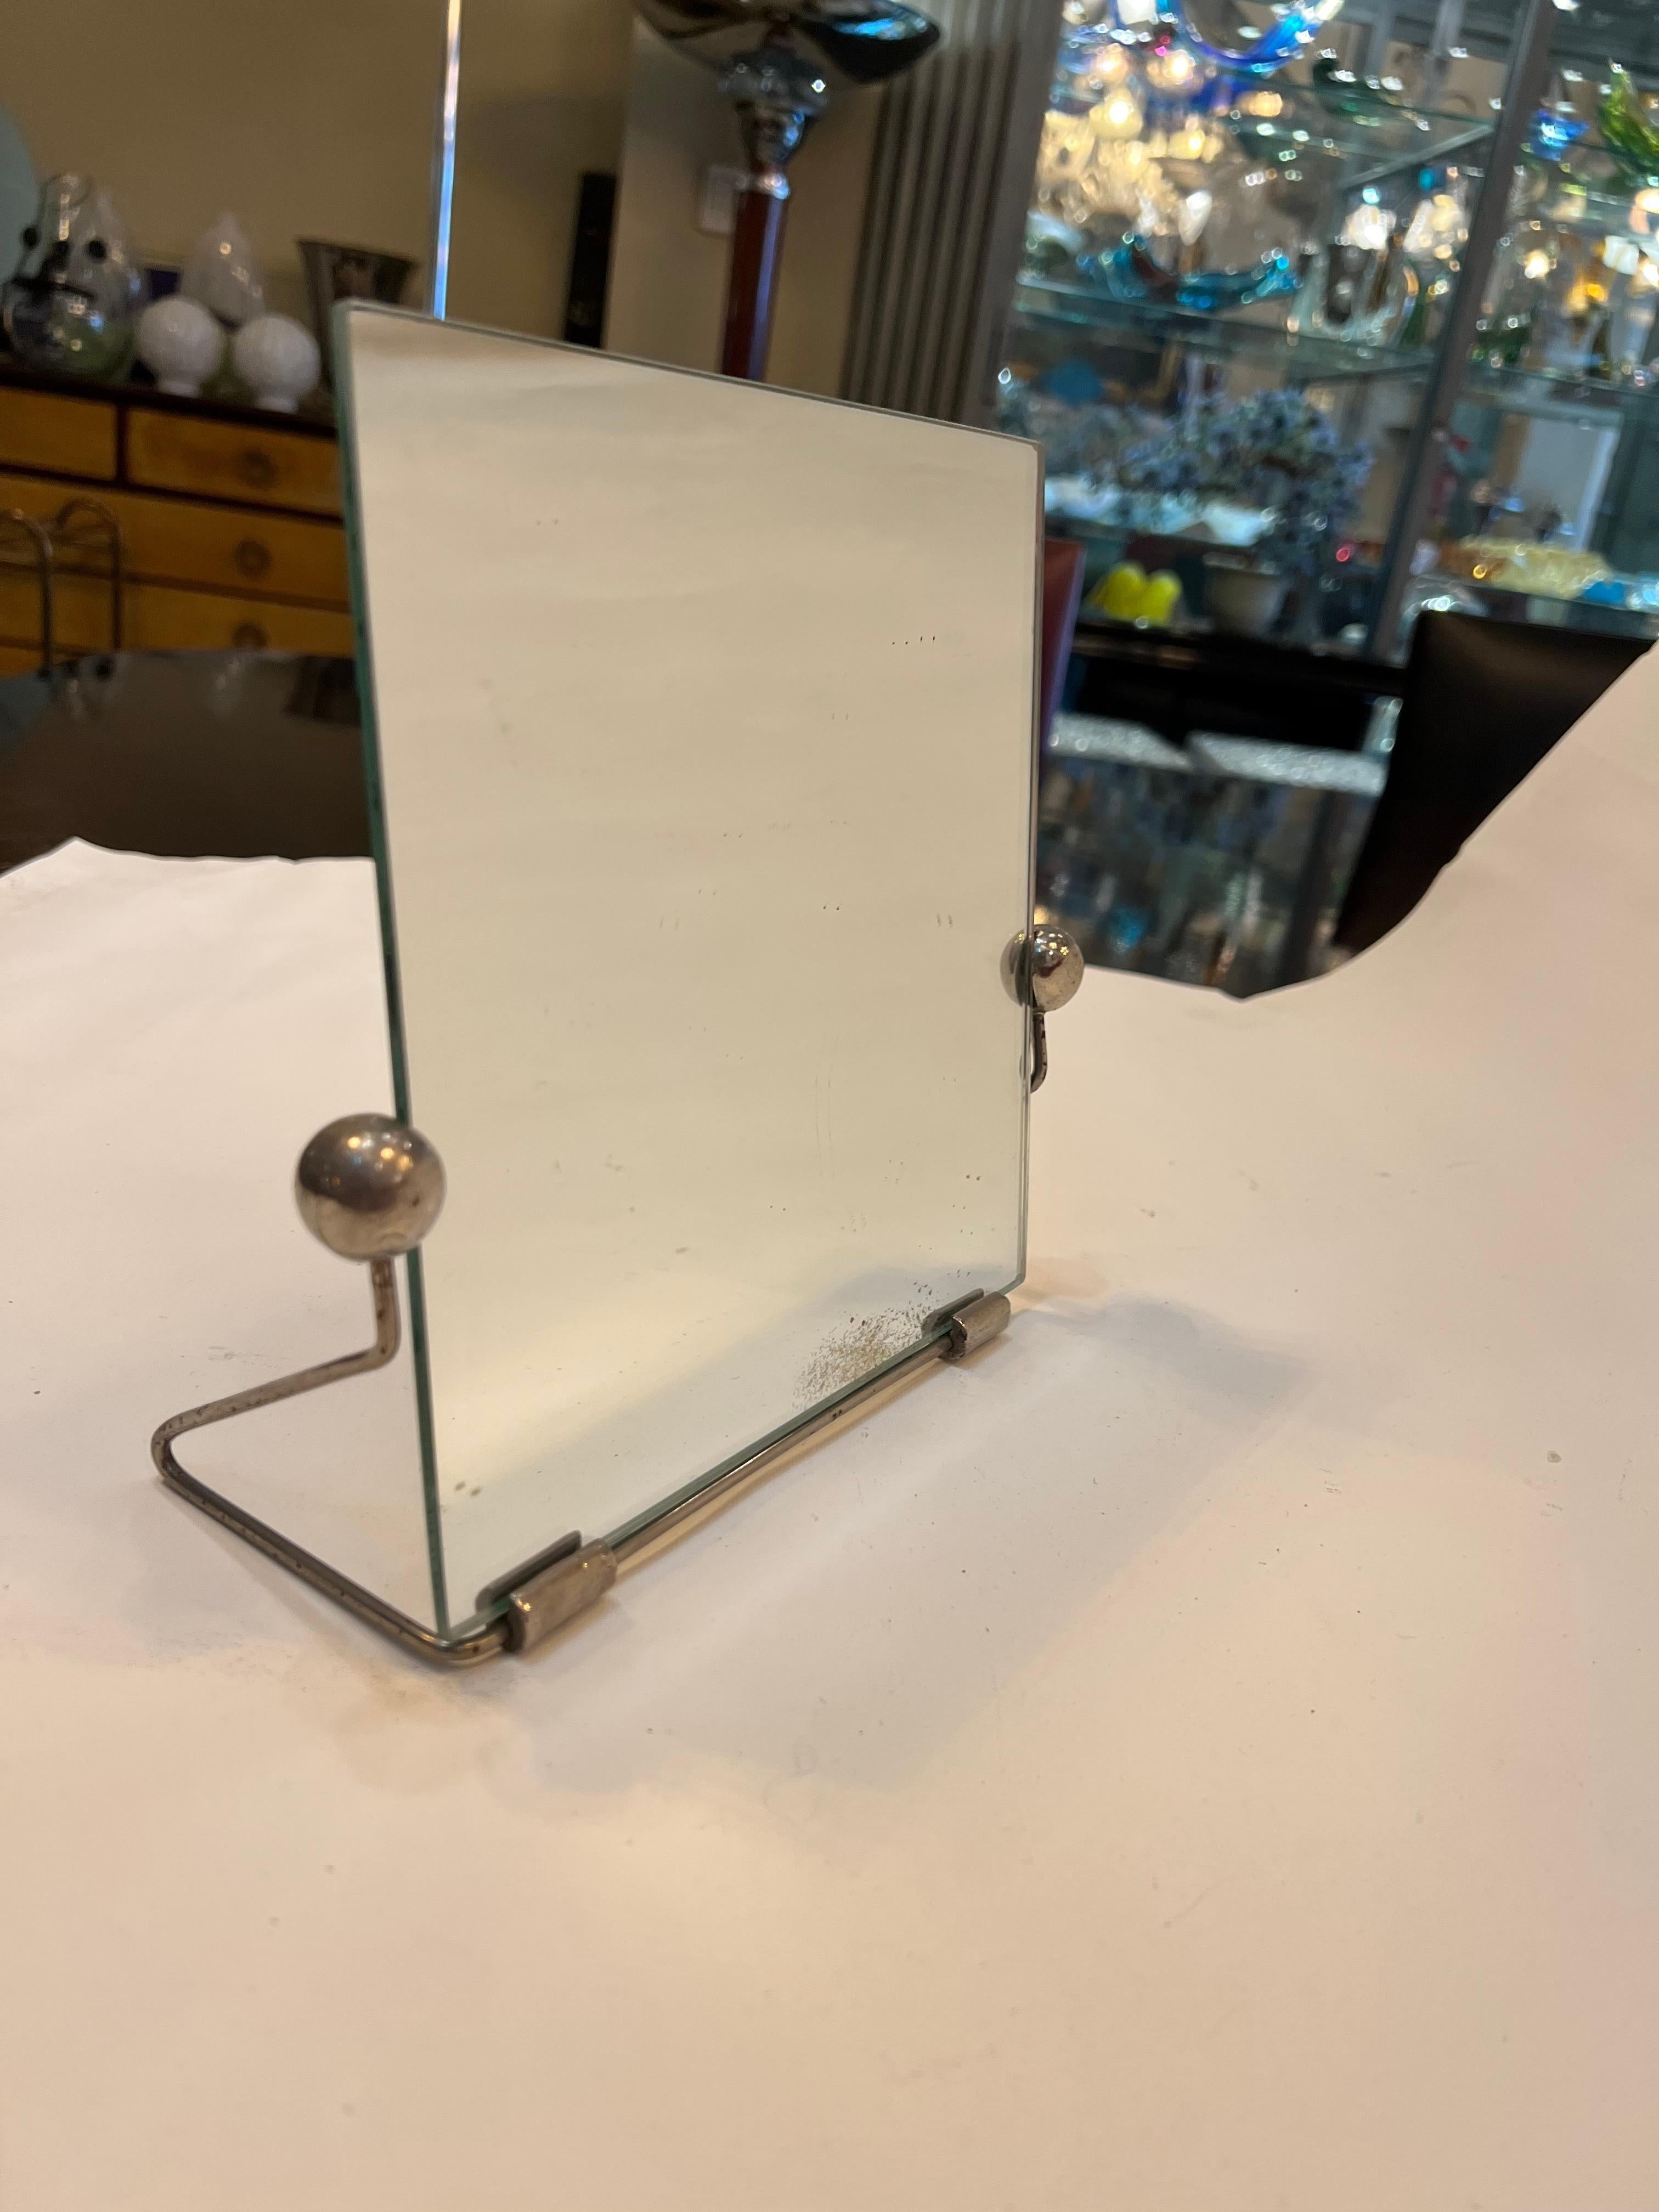 Amaizing mirror
Chrome and Mirror
We have specialized in the sale of Art Deco and Art Nouveau and Vintage styles since 1982. If you have any questions we are at your disposal.
Pushing the button that reads 'View All From Seller'. And you can see